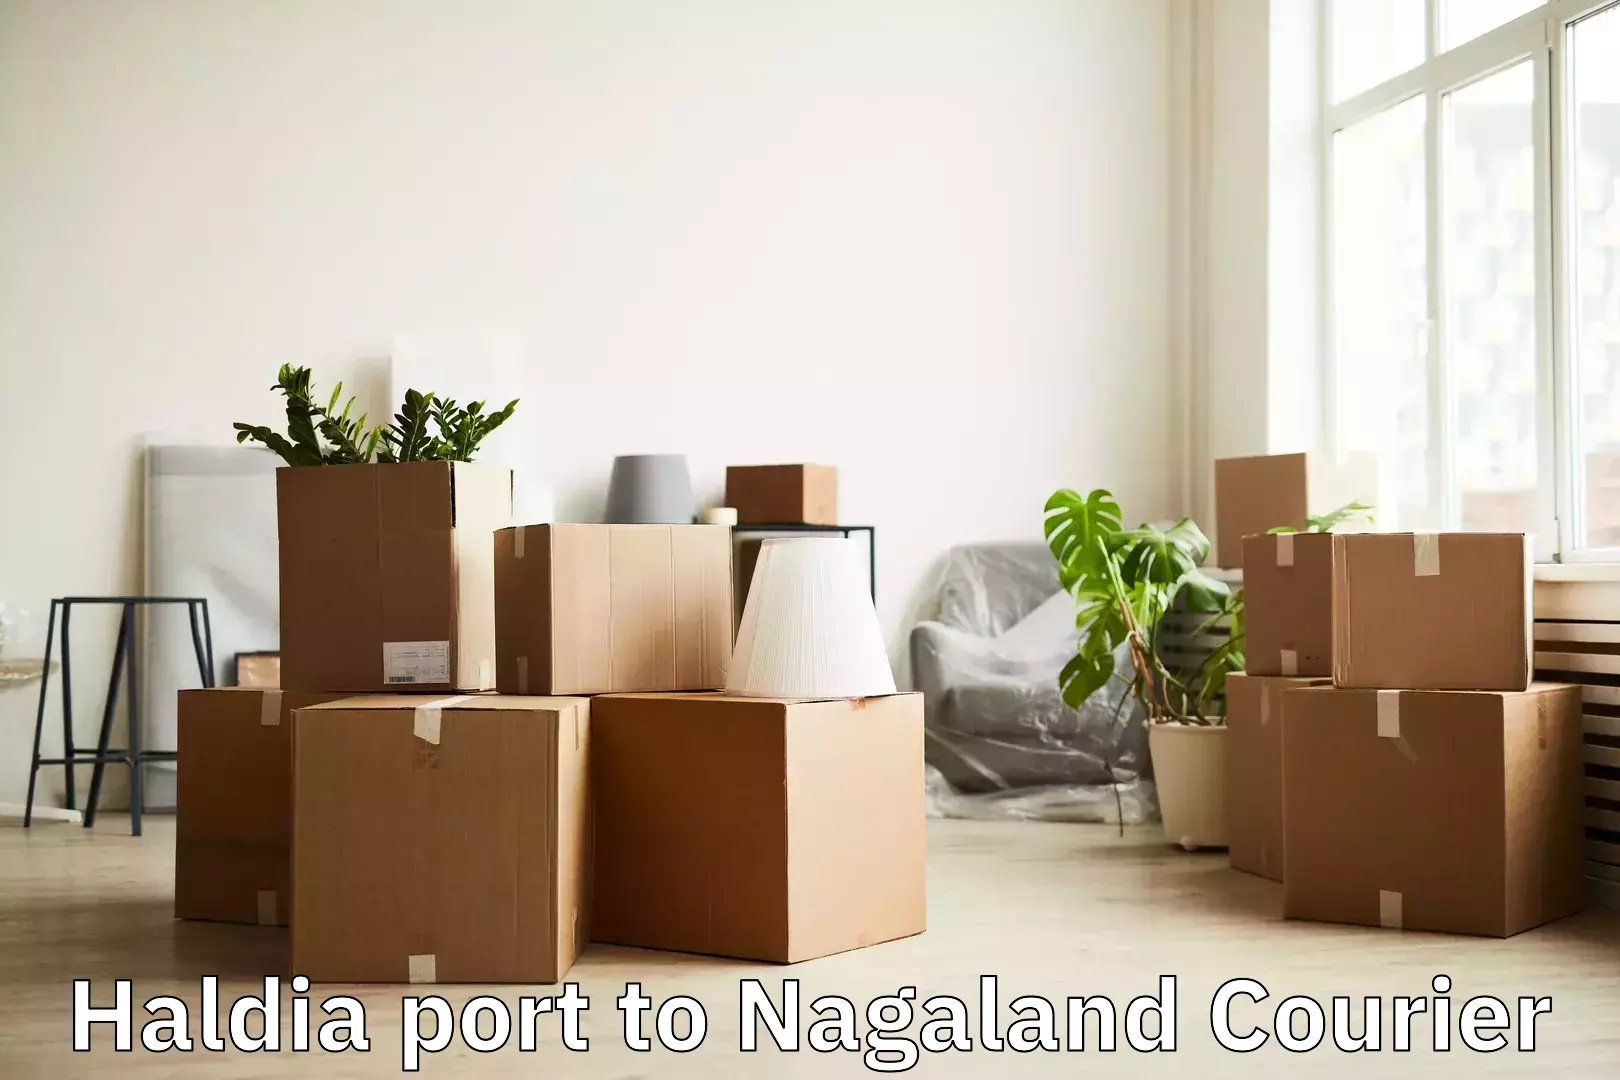 Luggage delivery system Haldia port to Nagaland